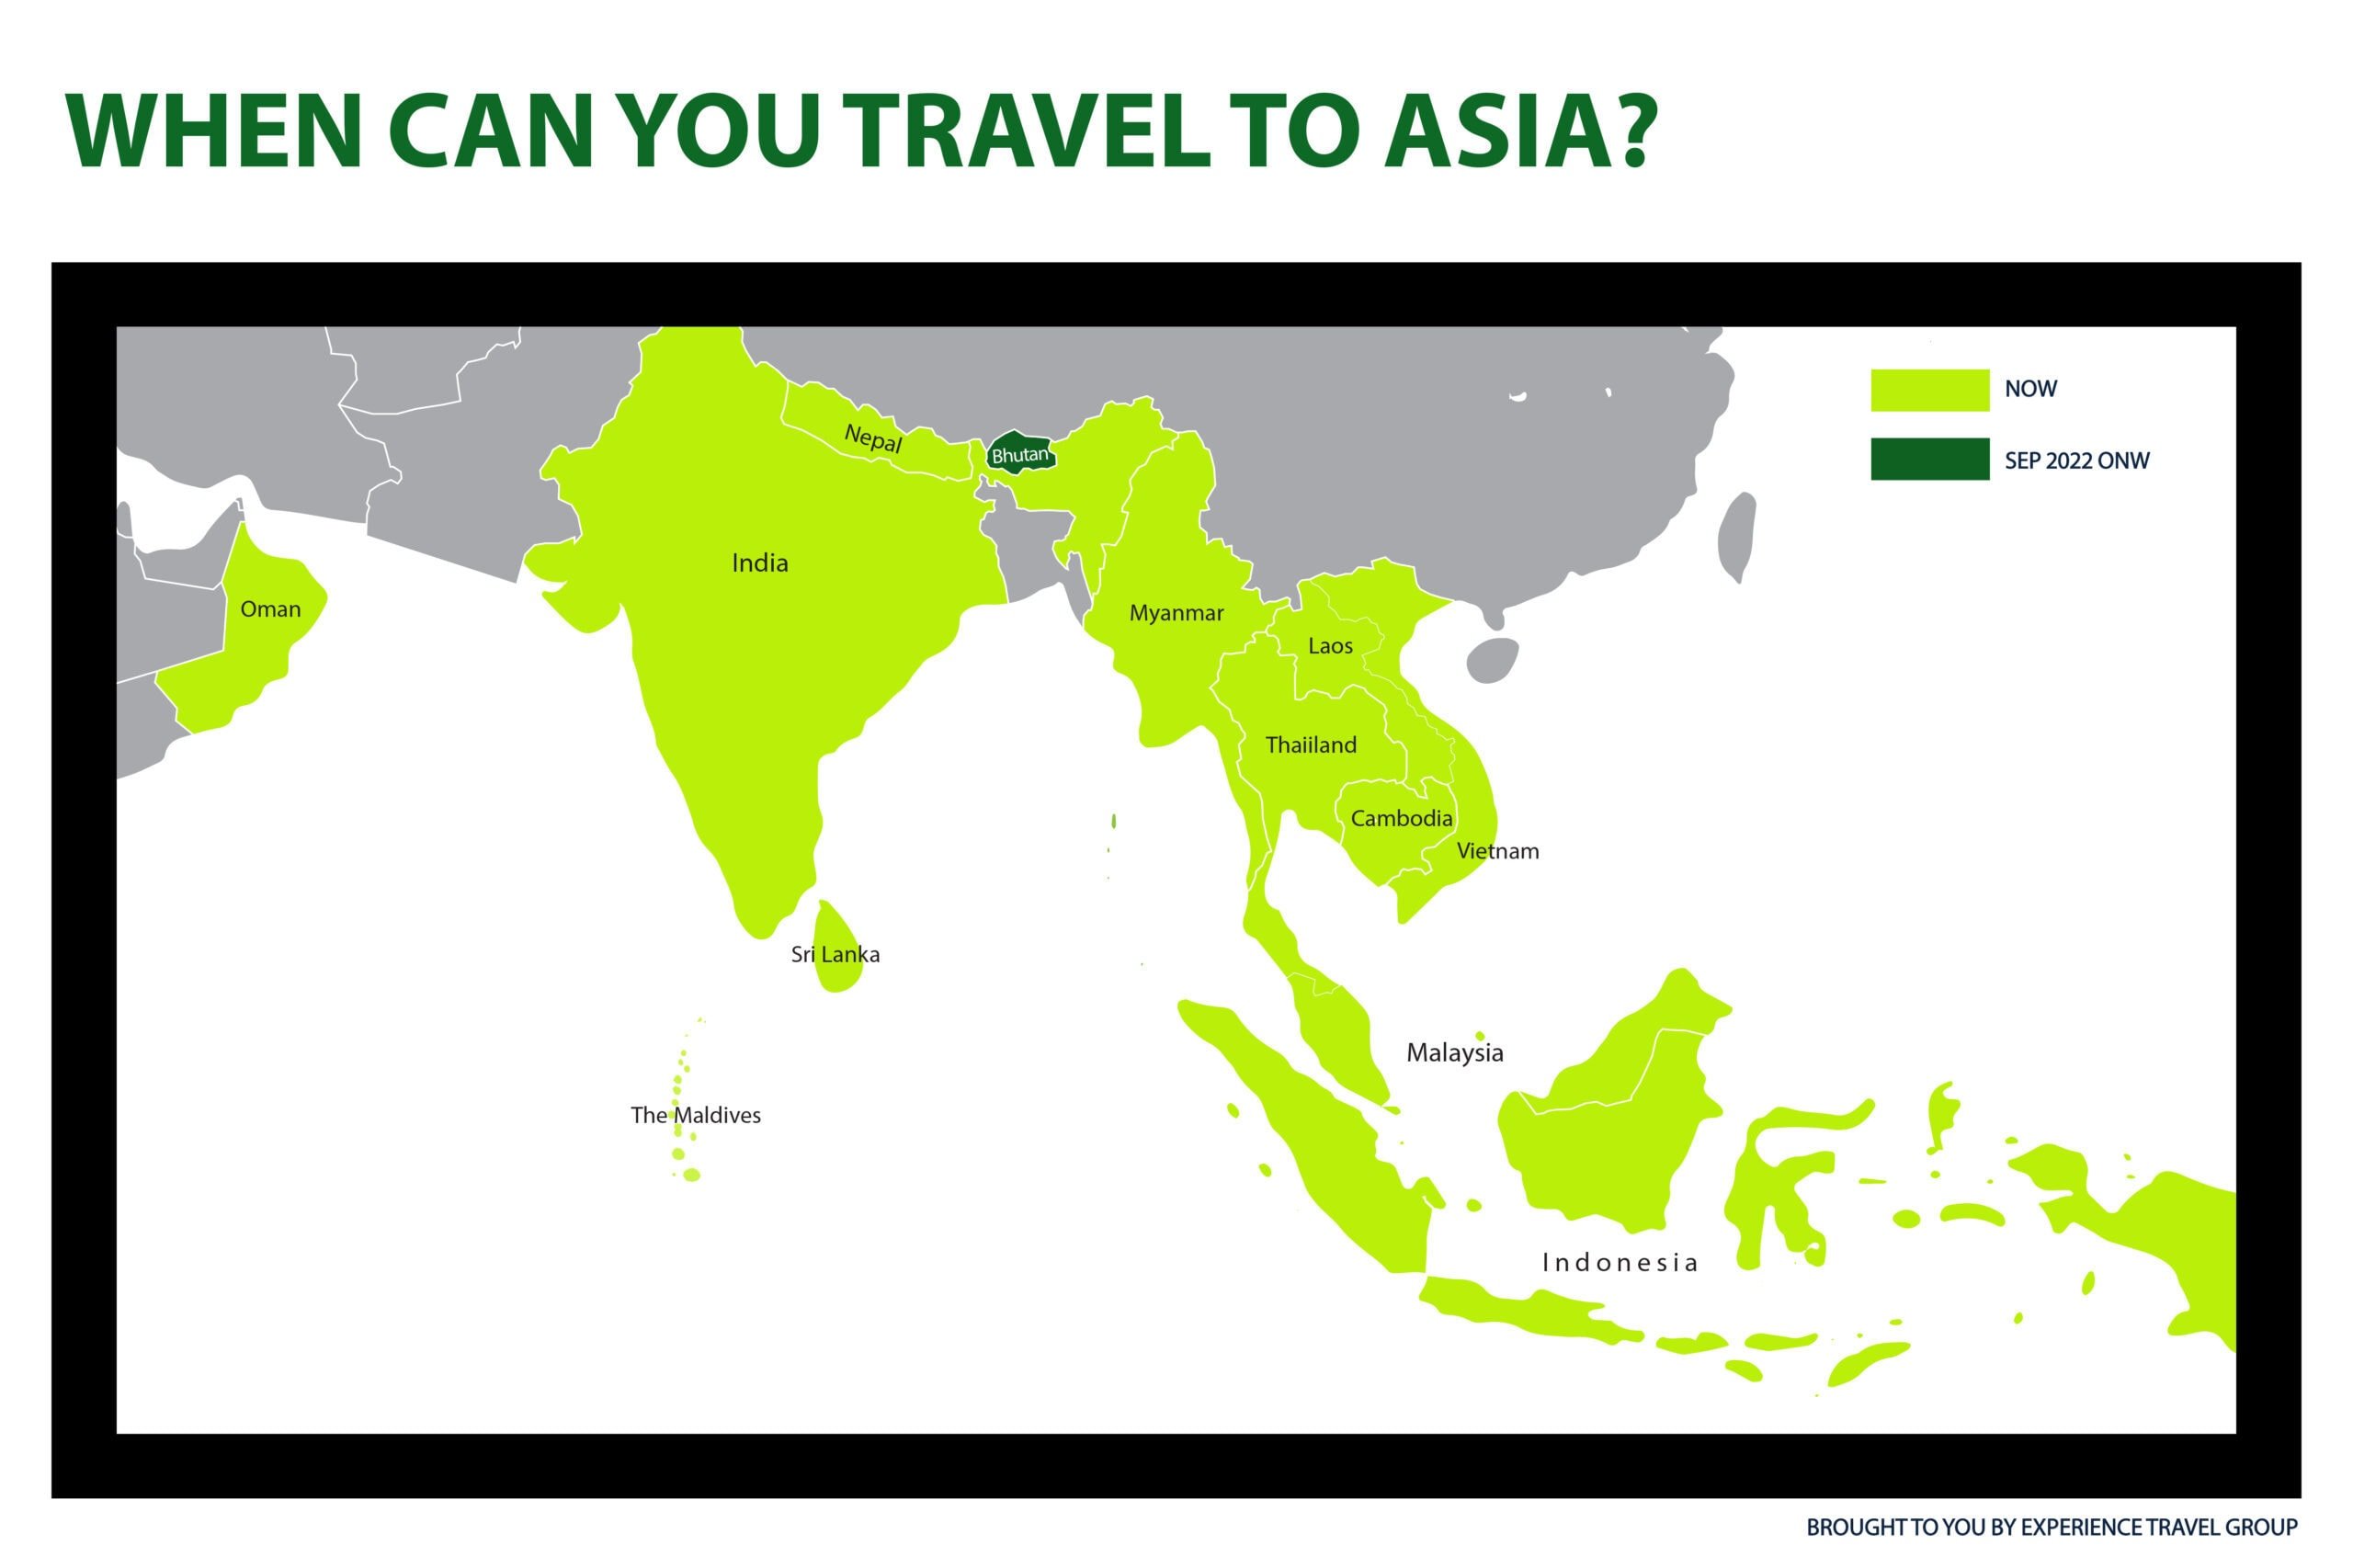 When Can You Travel to Asia